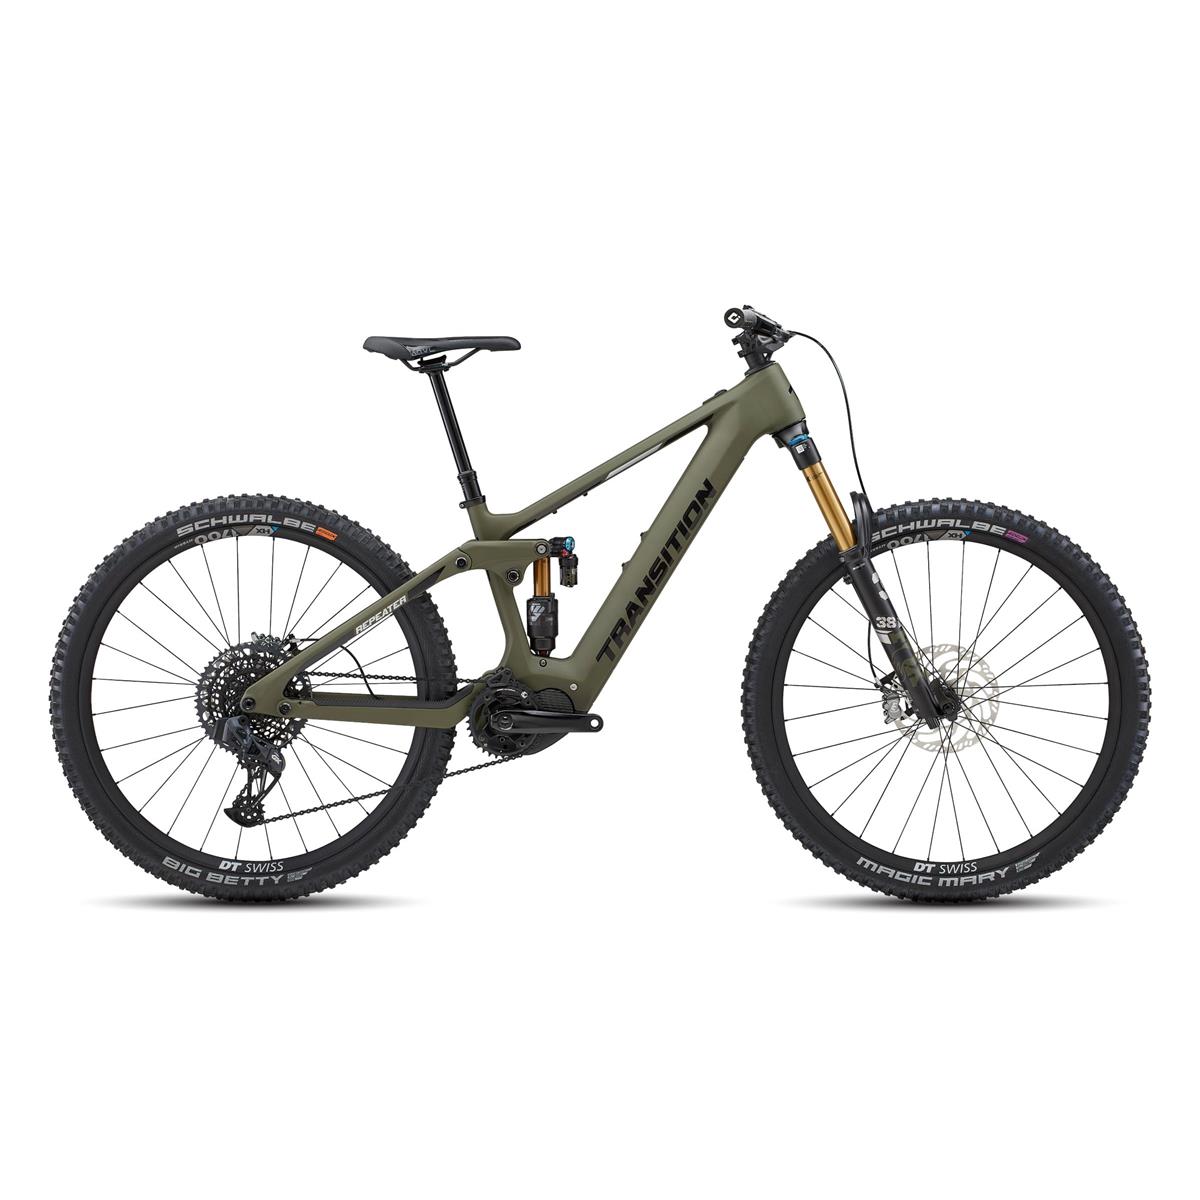 Repeater Carbon AXS 29'' 160mm 12v 630Wh Shimano EP8 Mossy Green Taglia S